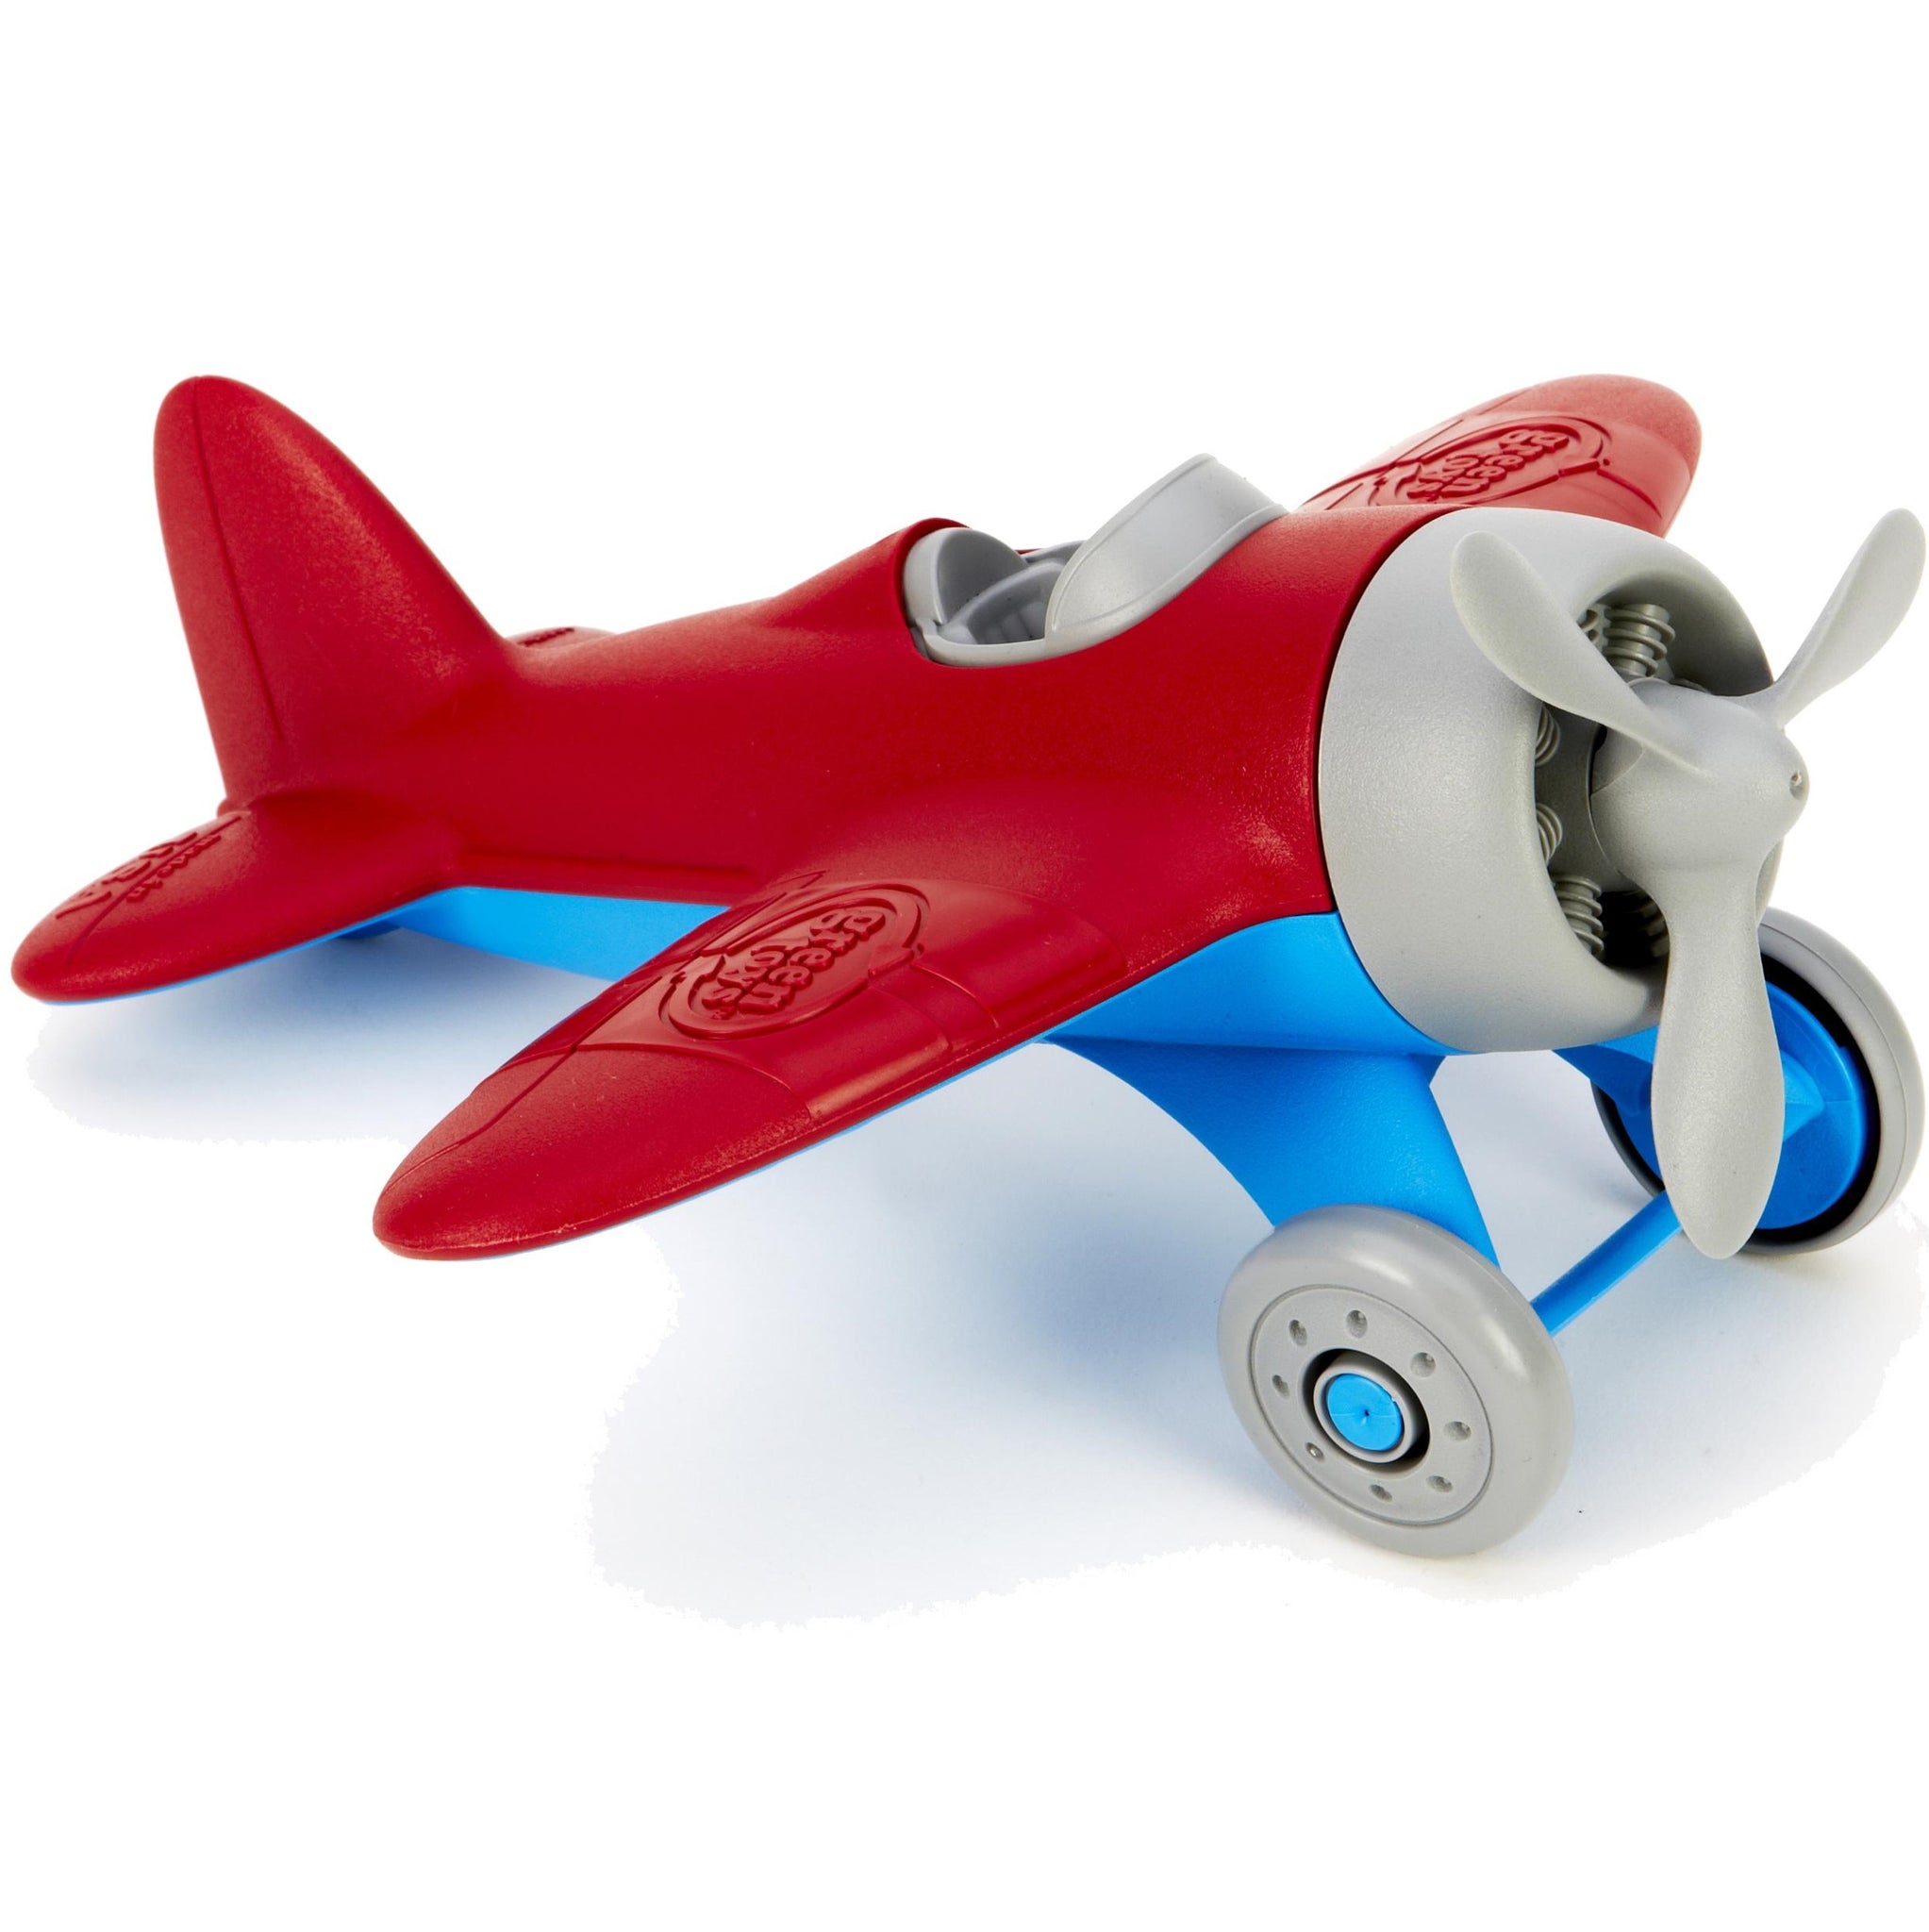 where to buy toy airplanes